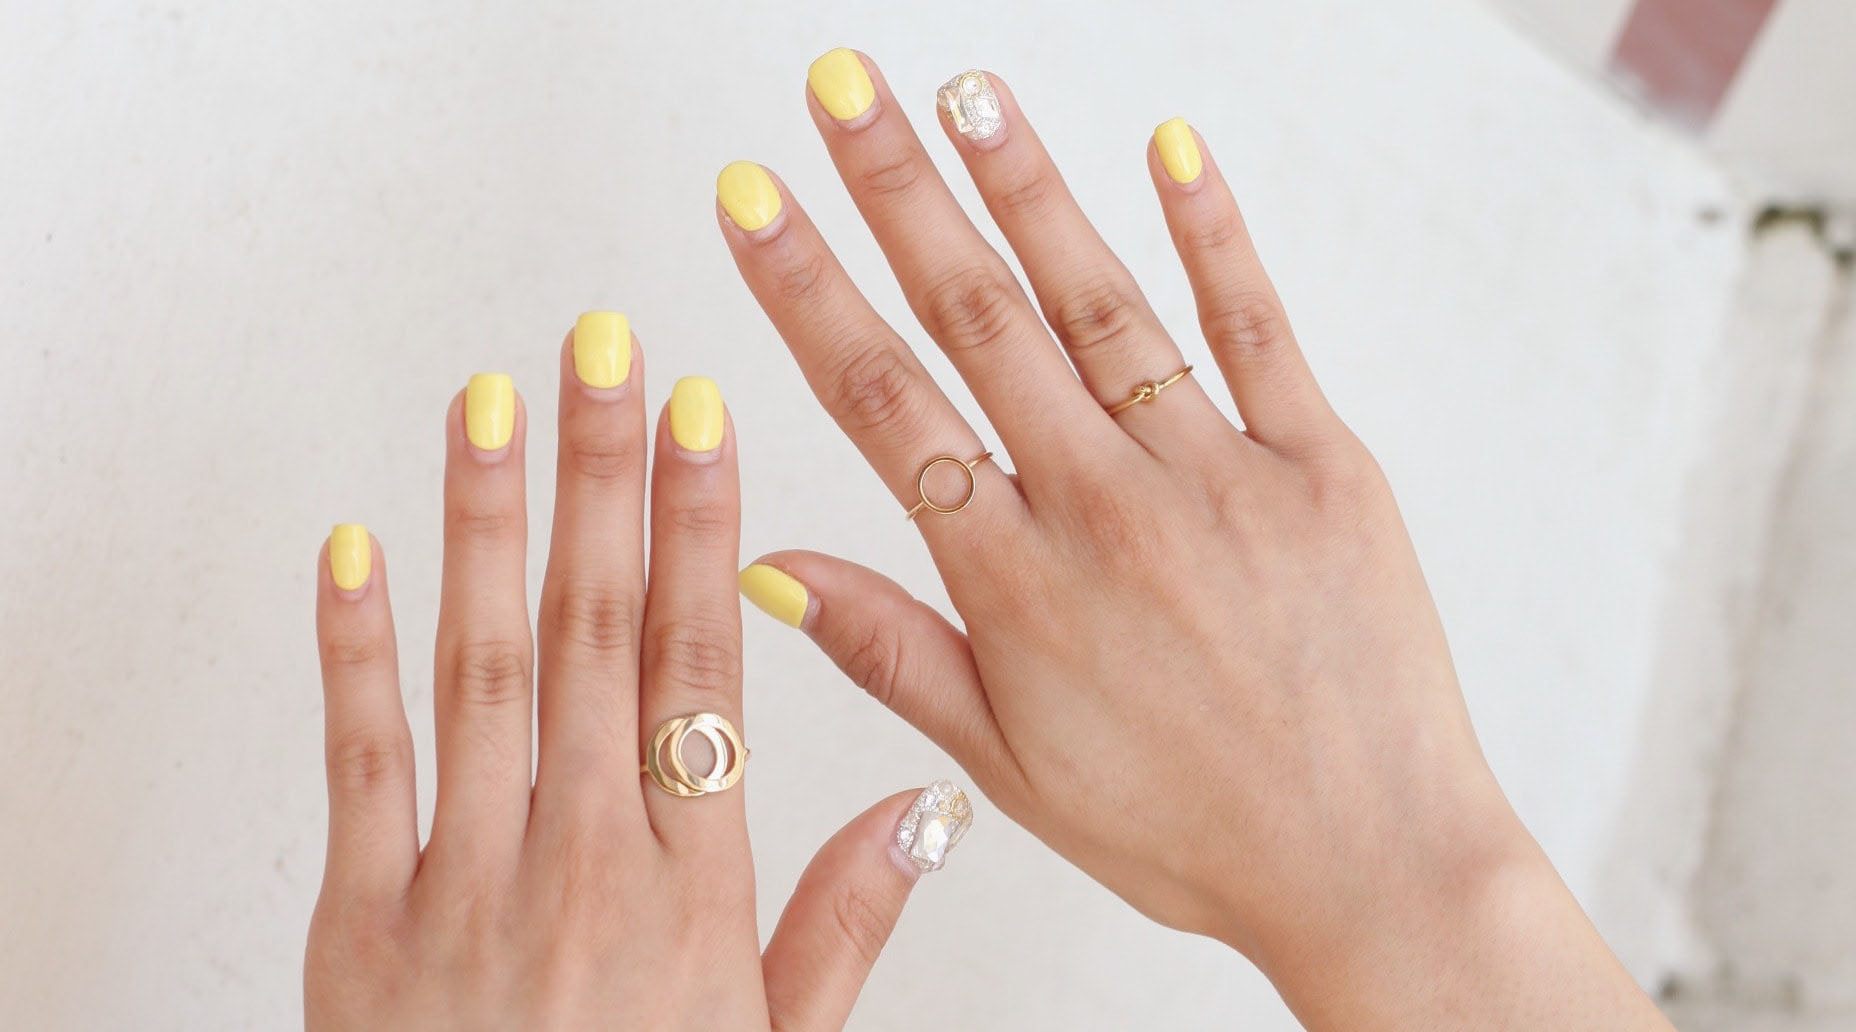 woman's hands with yellow nail polish wearing minimalist rings